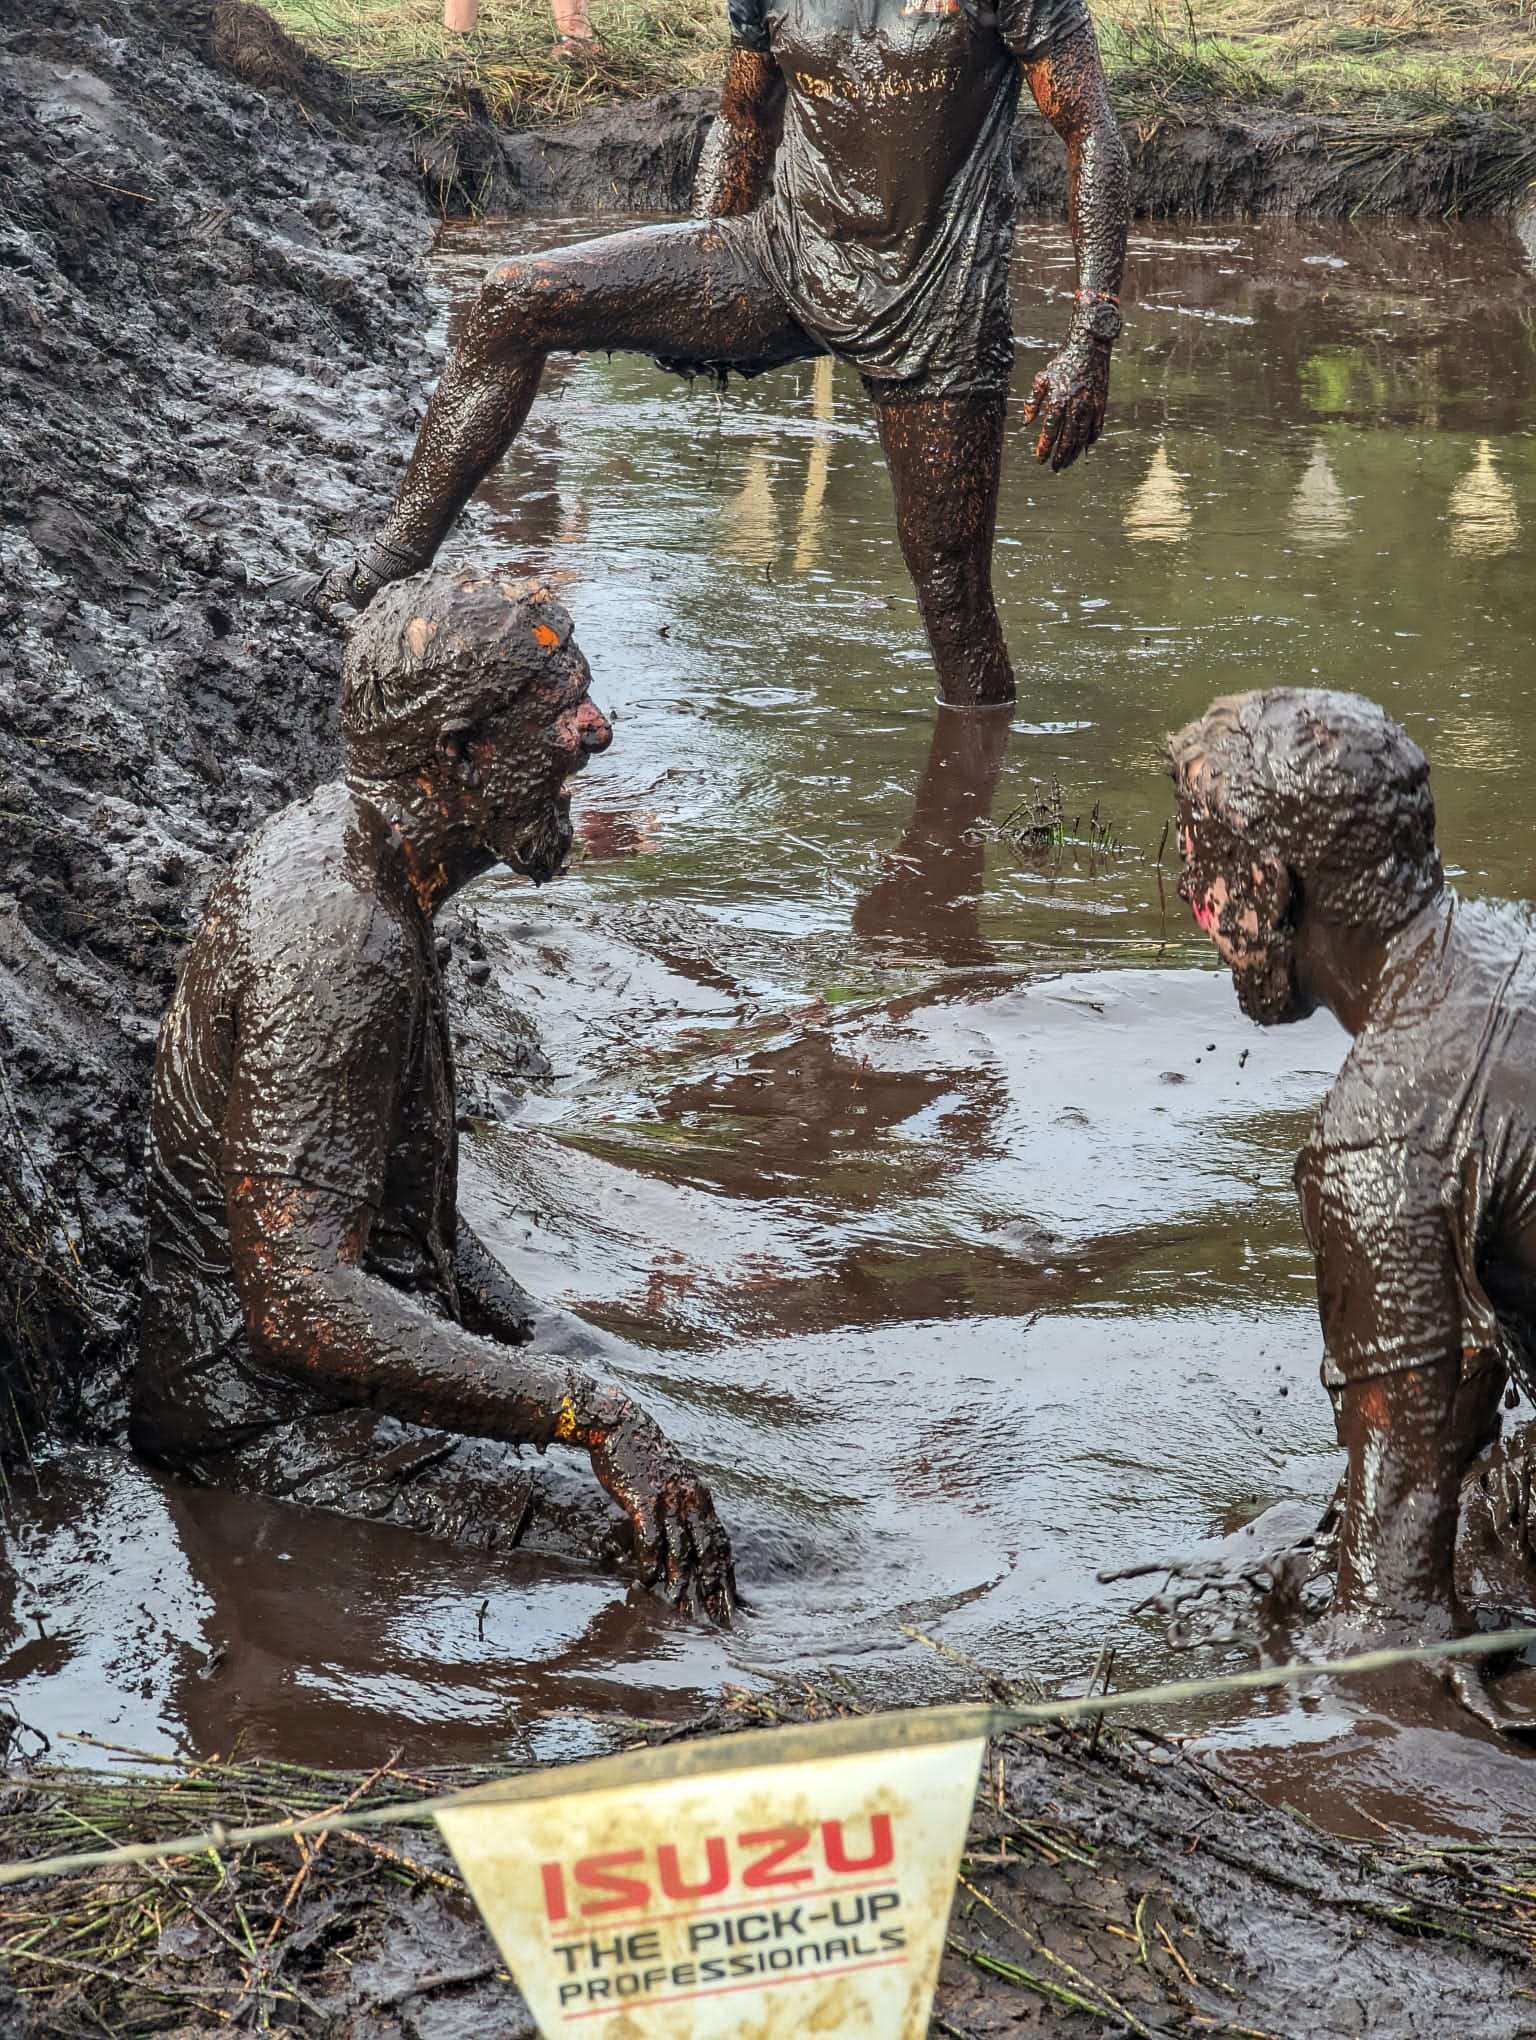 Three extremely muddy people stood in the middle of an obstacle consisting of a large mud bank and deep pools of water. The people are all covered entirely head to foot in mud.